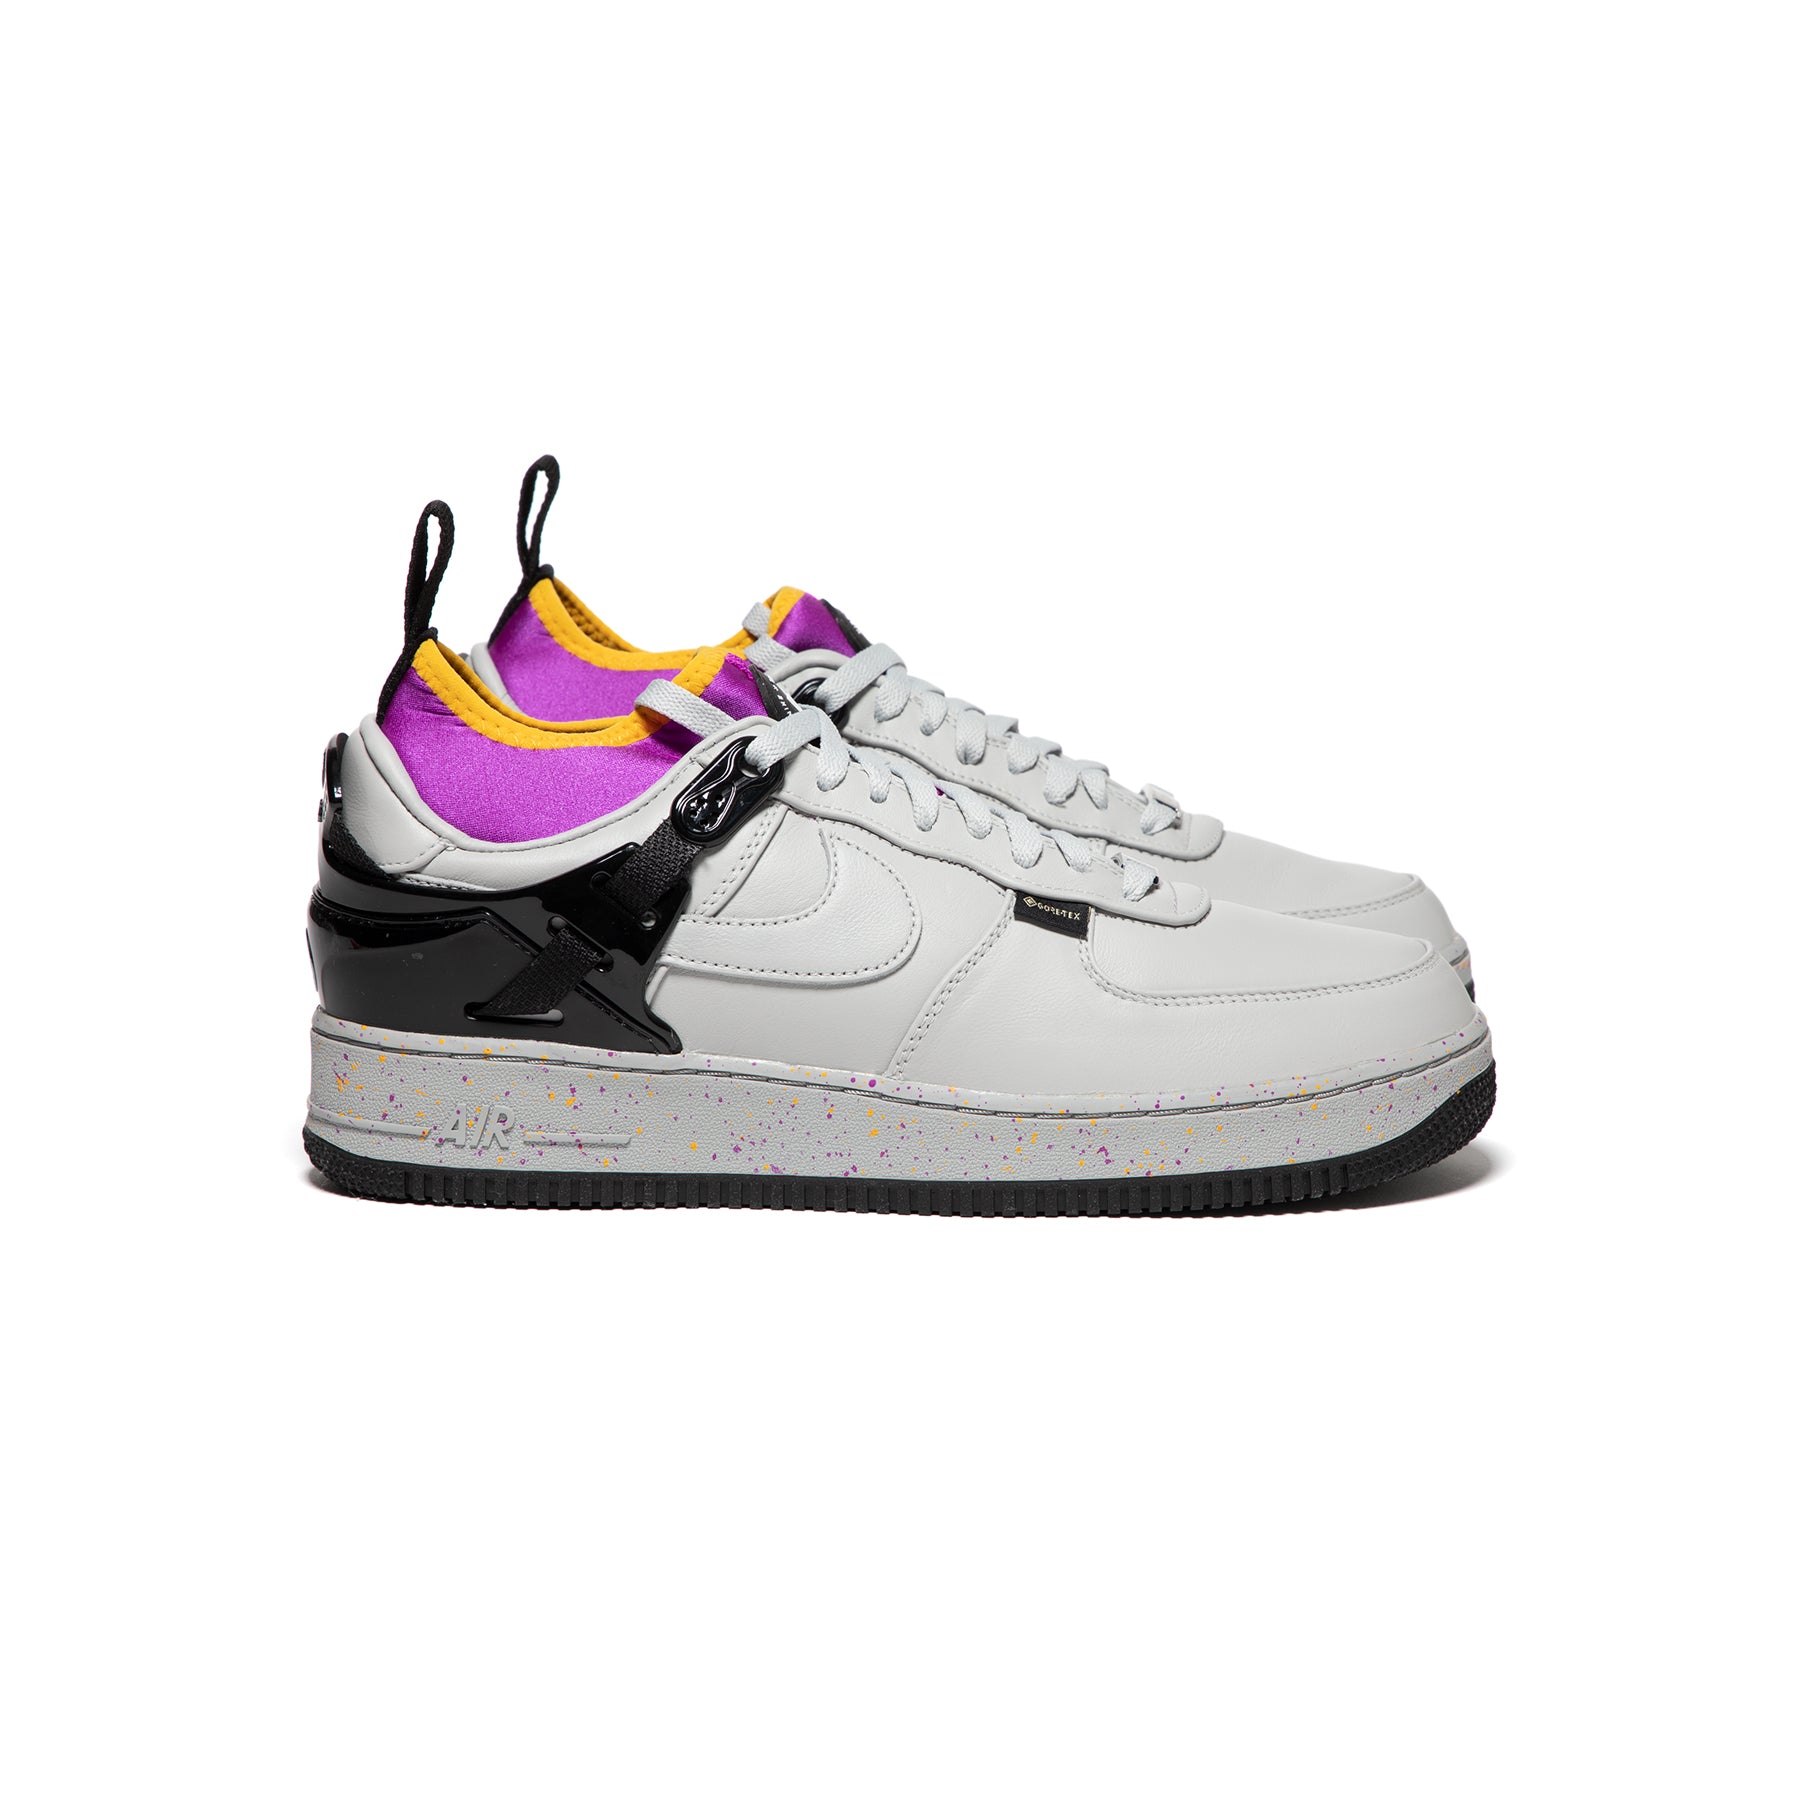 Nike UNDERCOVER Air Force 1 Low SP (Grey Fog/Black/University – Concepts